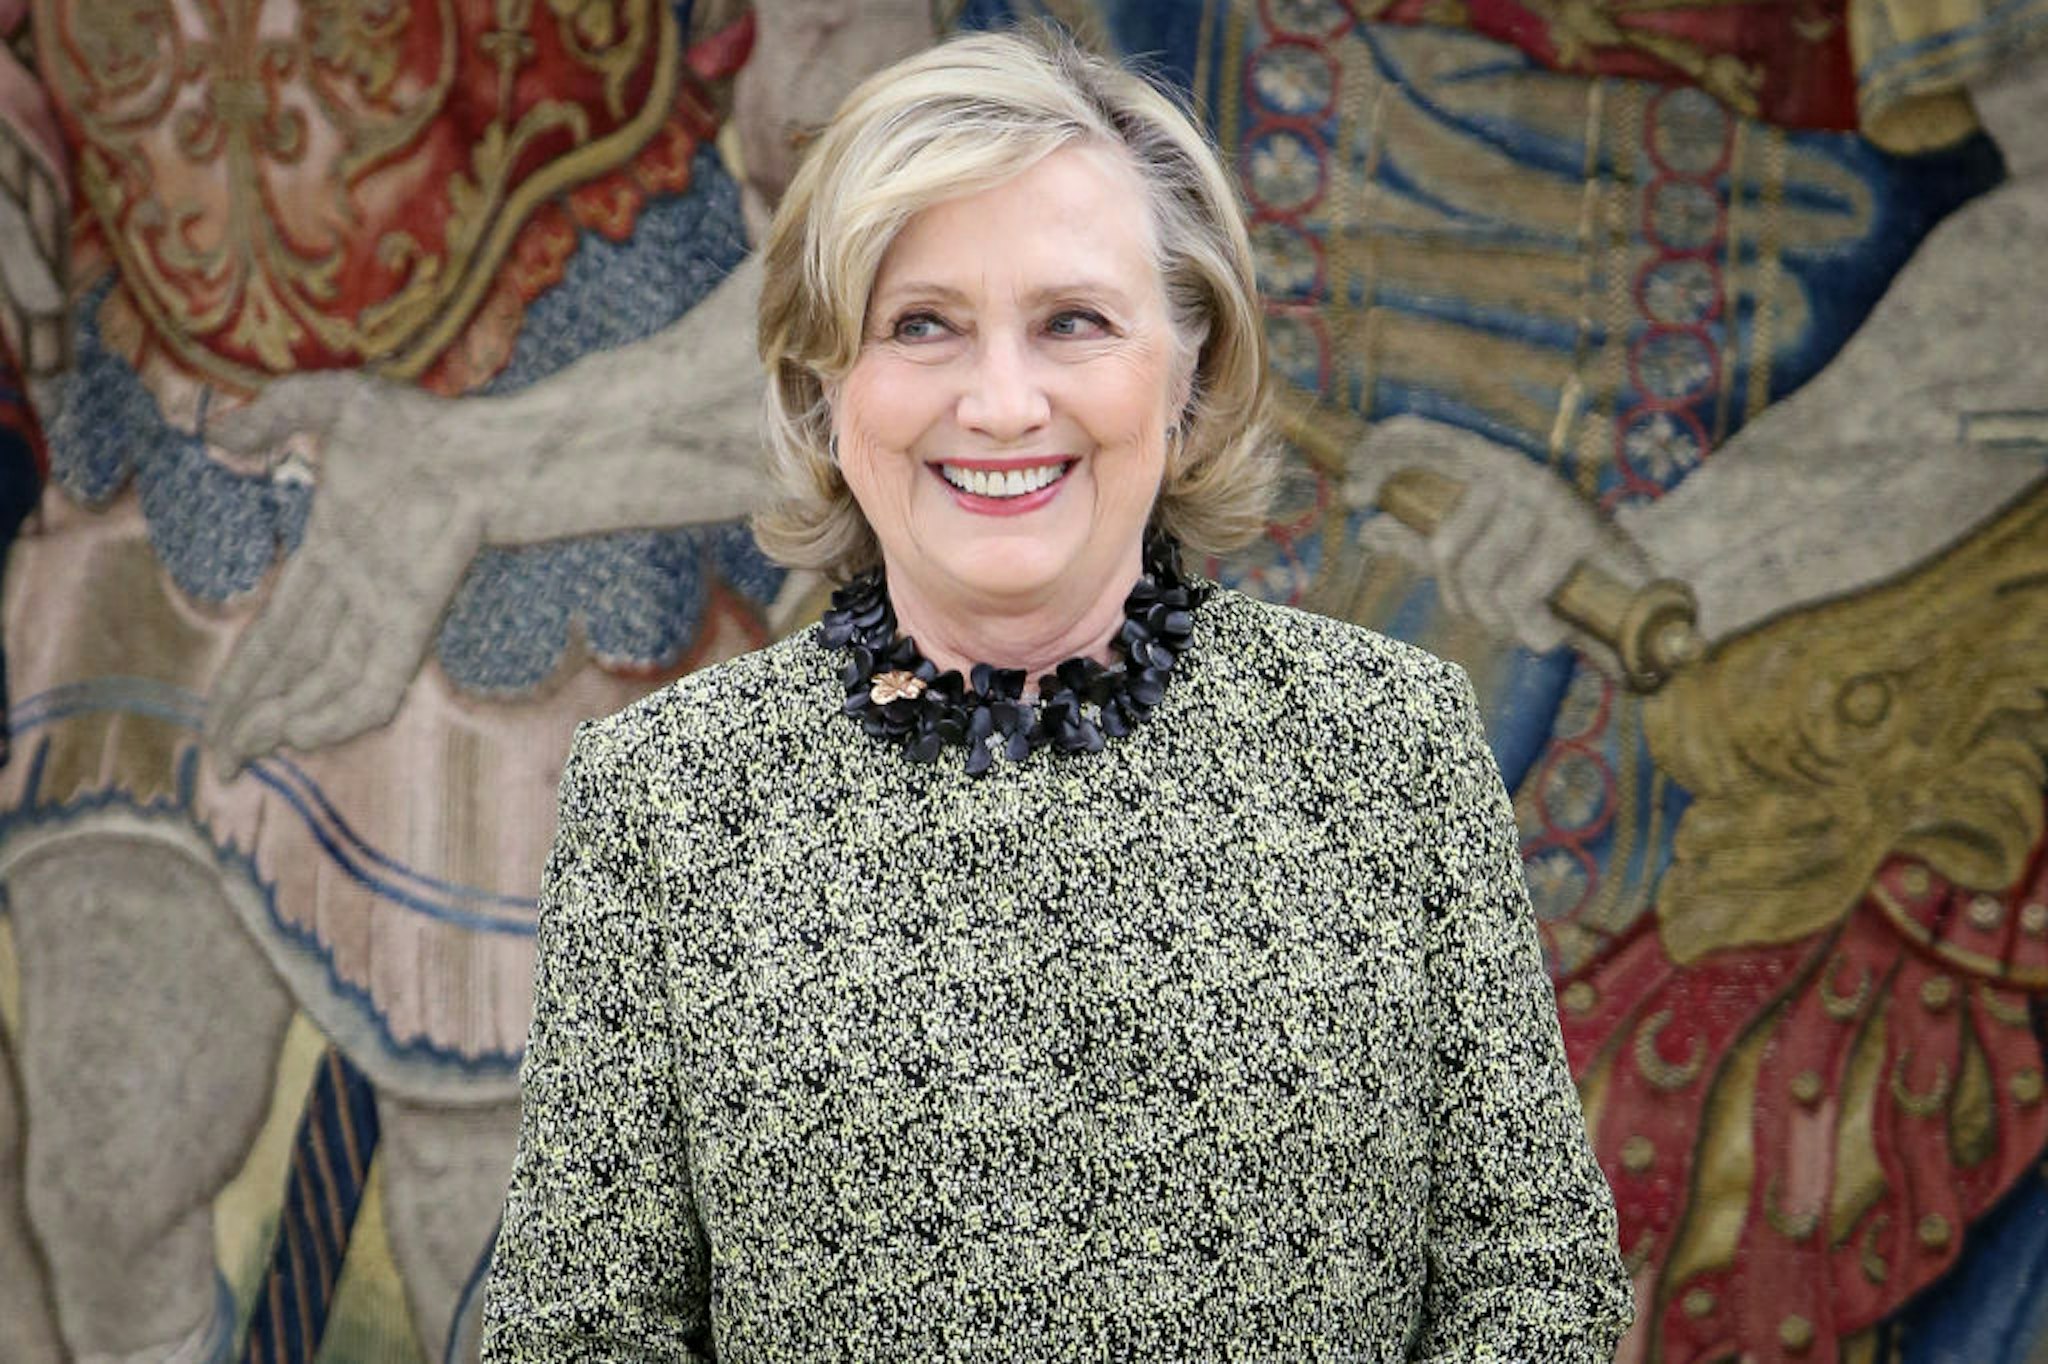 MADRID, SPAIN - MAY 31: King Felipe VI of Spain meets Former Secretary of State Hillary Rodham Clinton at Zarzuela Palace on May 31, 2023 in Madrid, Spain. (Photo by Paolo Blocco/WireImage)